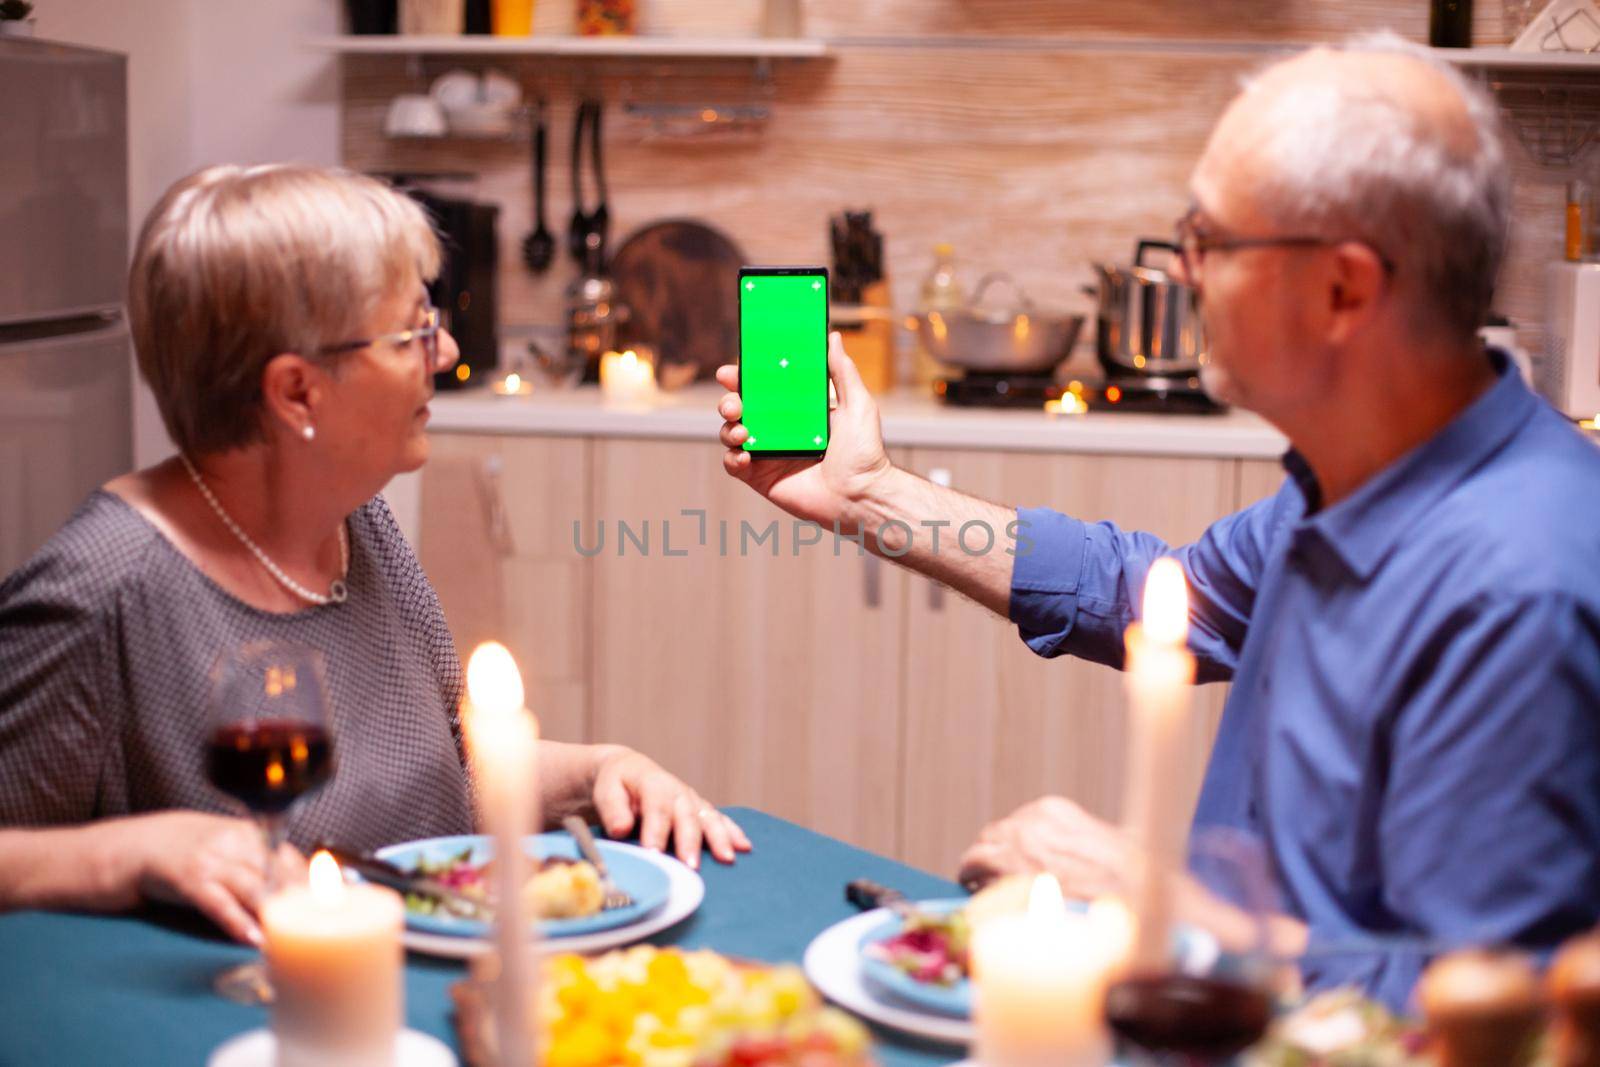 Mature man using phone with green screen in kitchen during romantic dinner with wife. Aged people looking at mockup template chroma key isolated smart phone display using techology internet.